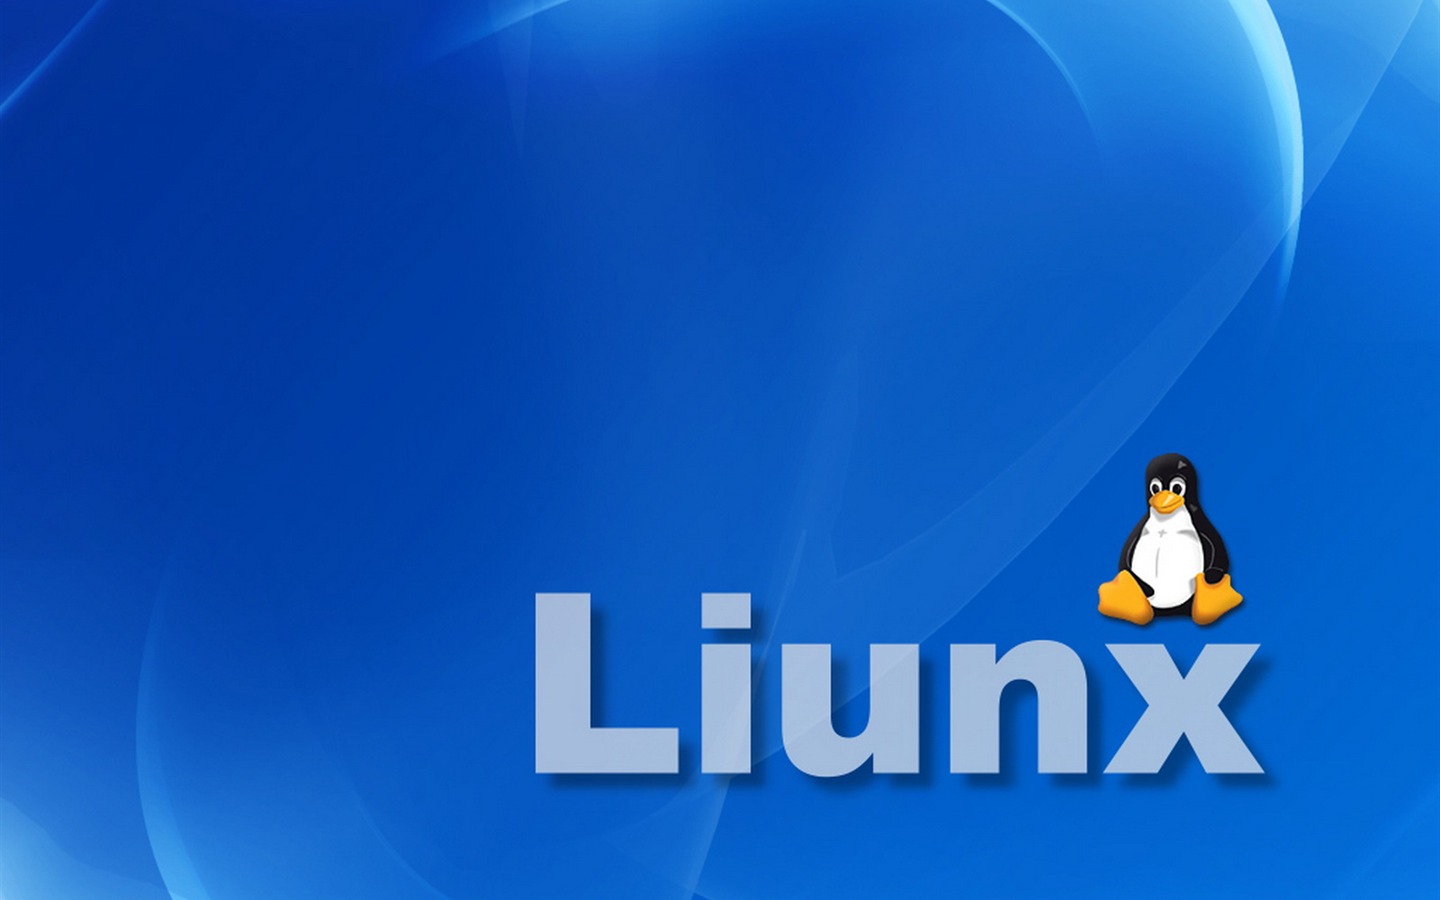 Linux tapety (1) #14 - 1440x900